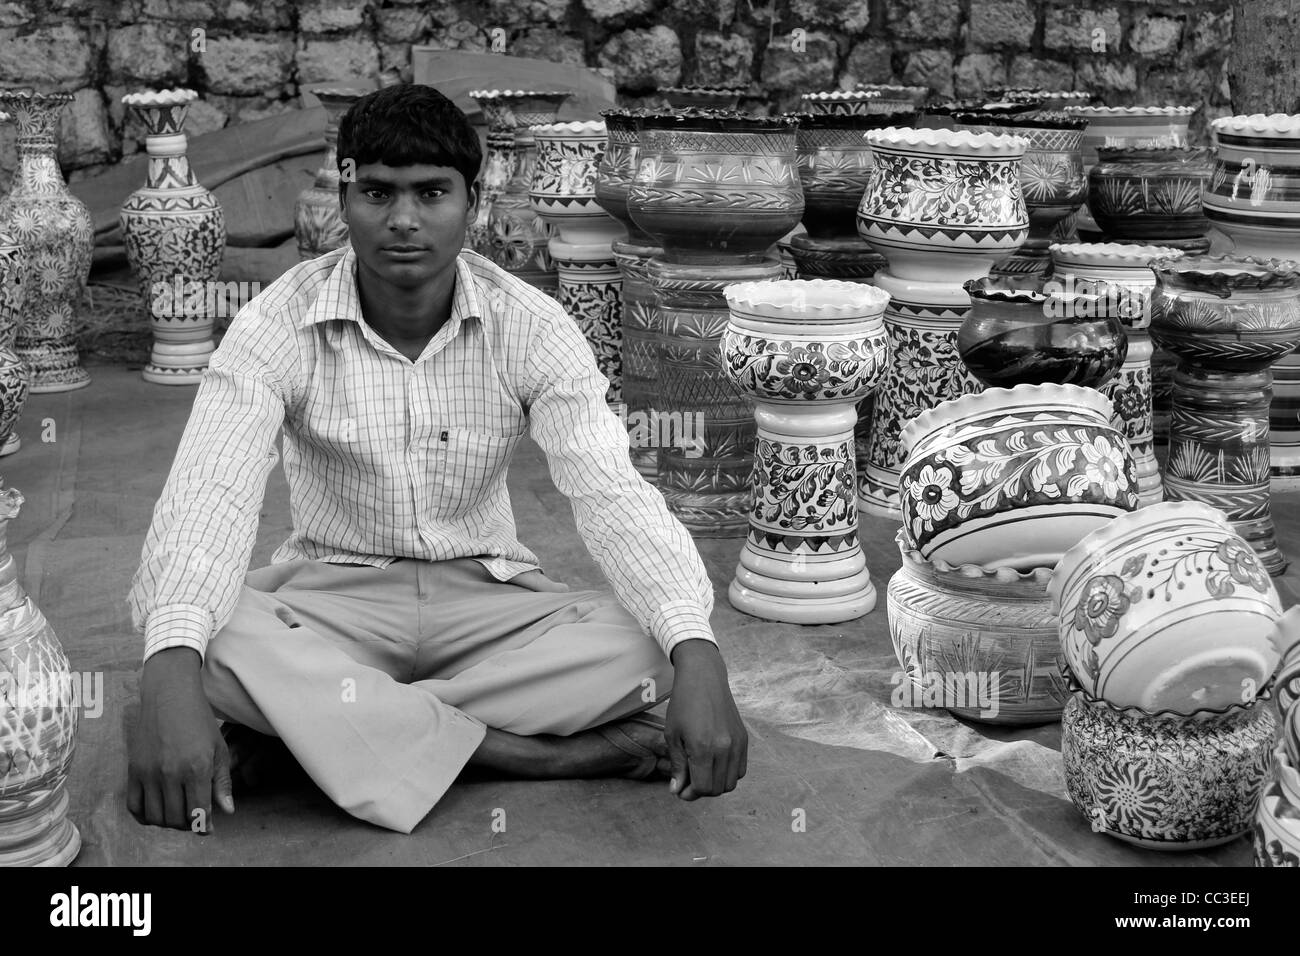 street vendor in India selling traditional ceramic crafts Stock Photo